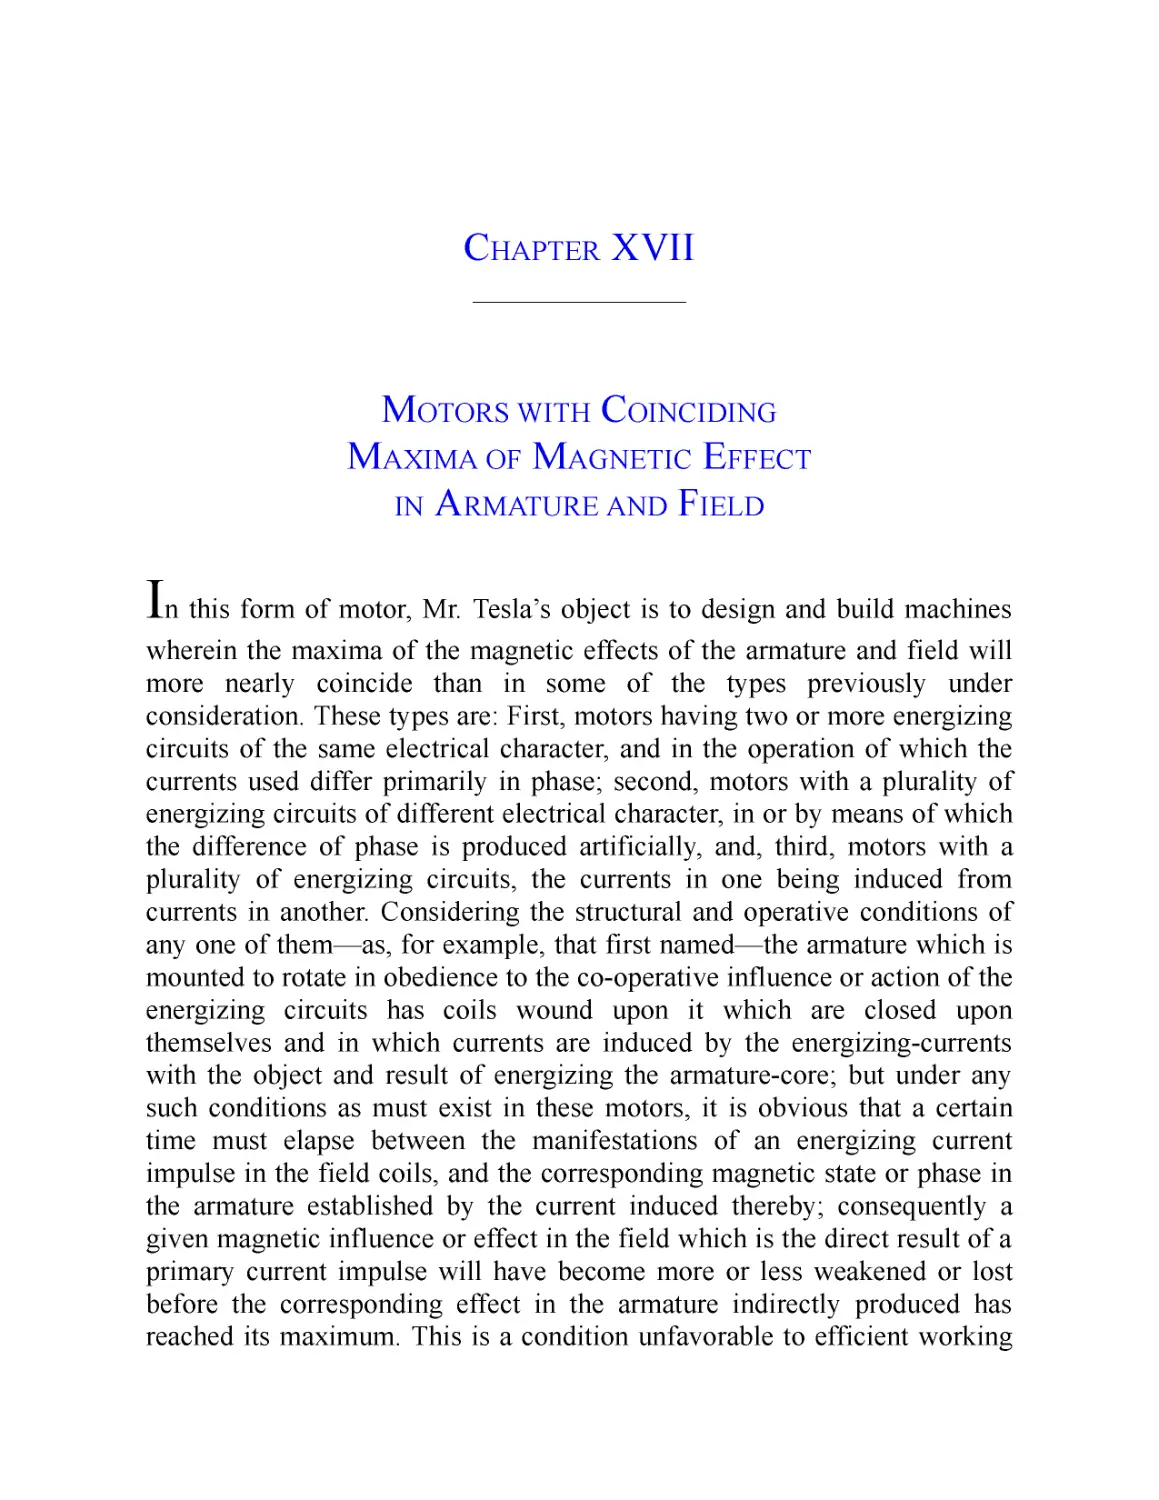 ﻿Chapter XVII: Motors with Coinciding Maxima of Magnetic Effect in Armature and Fiel